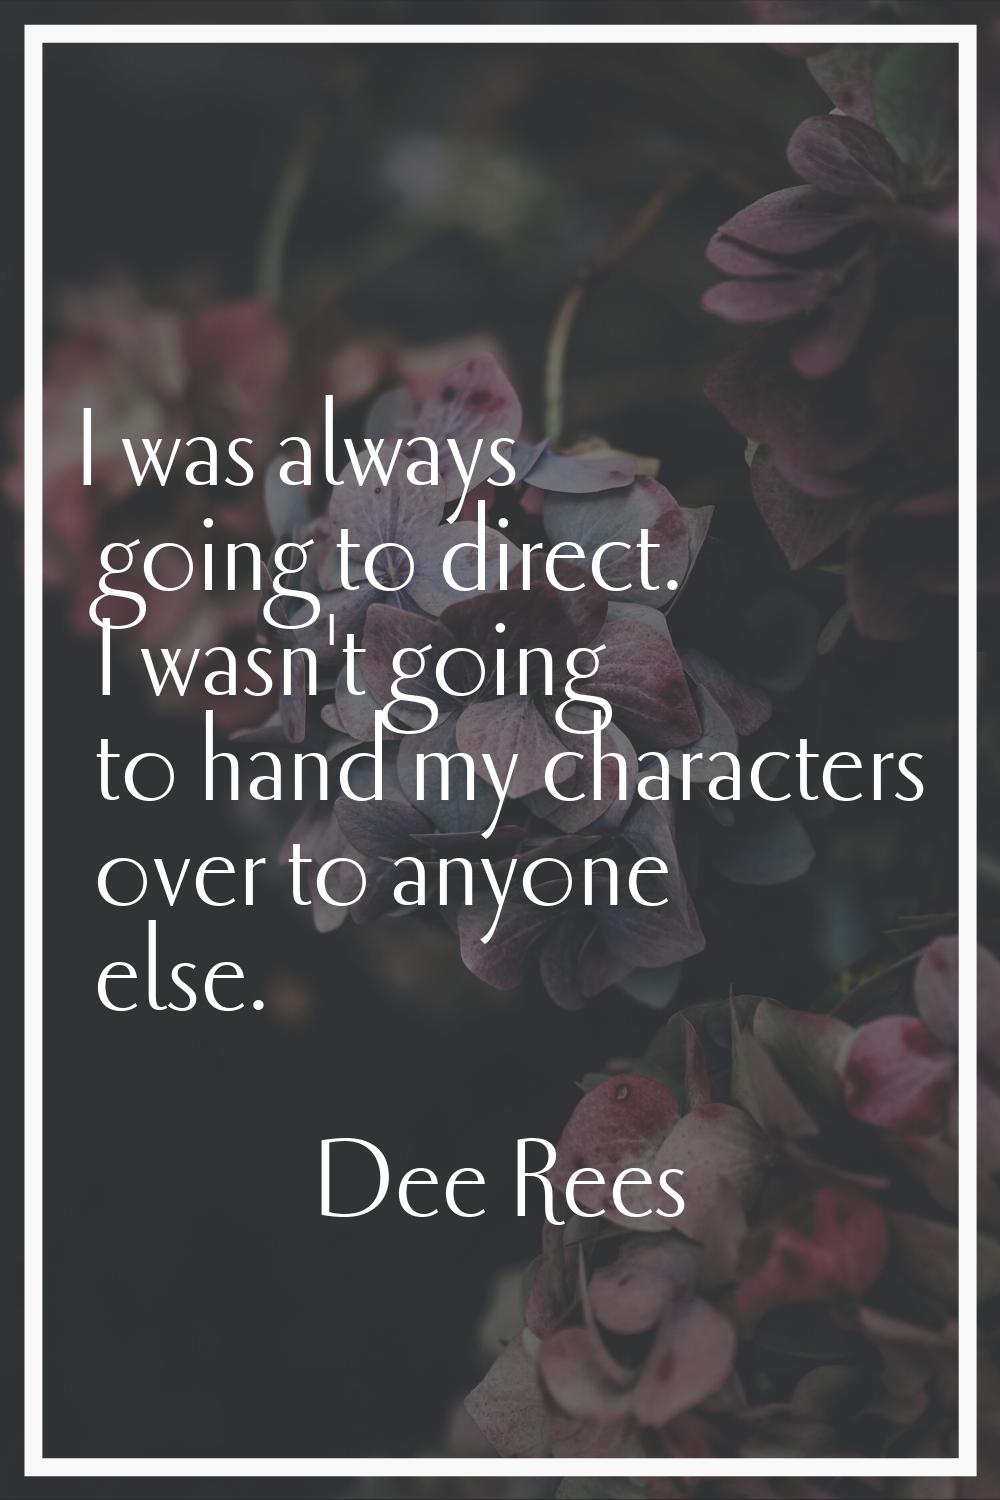 I was always going to direct. I wasn't going to hand my characters over to anyone else.